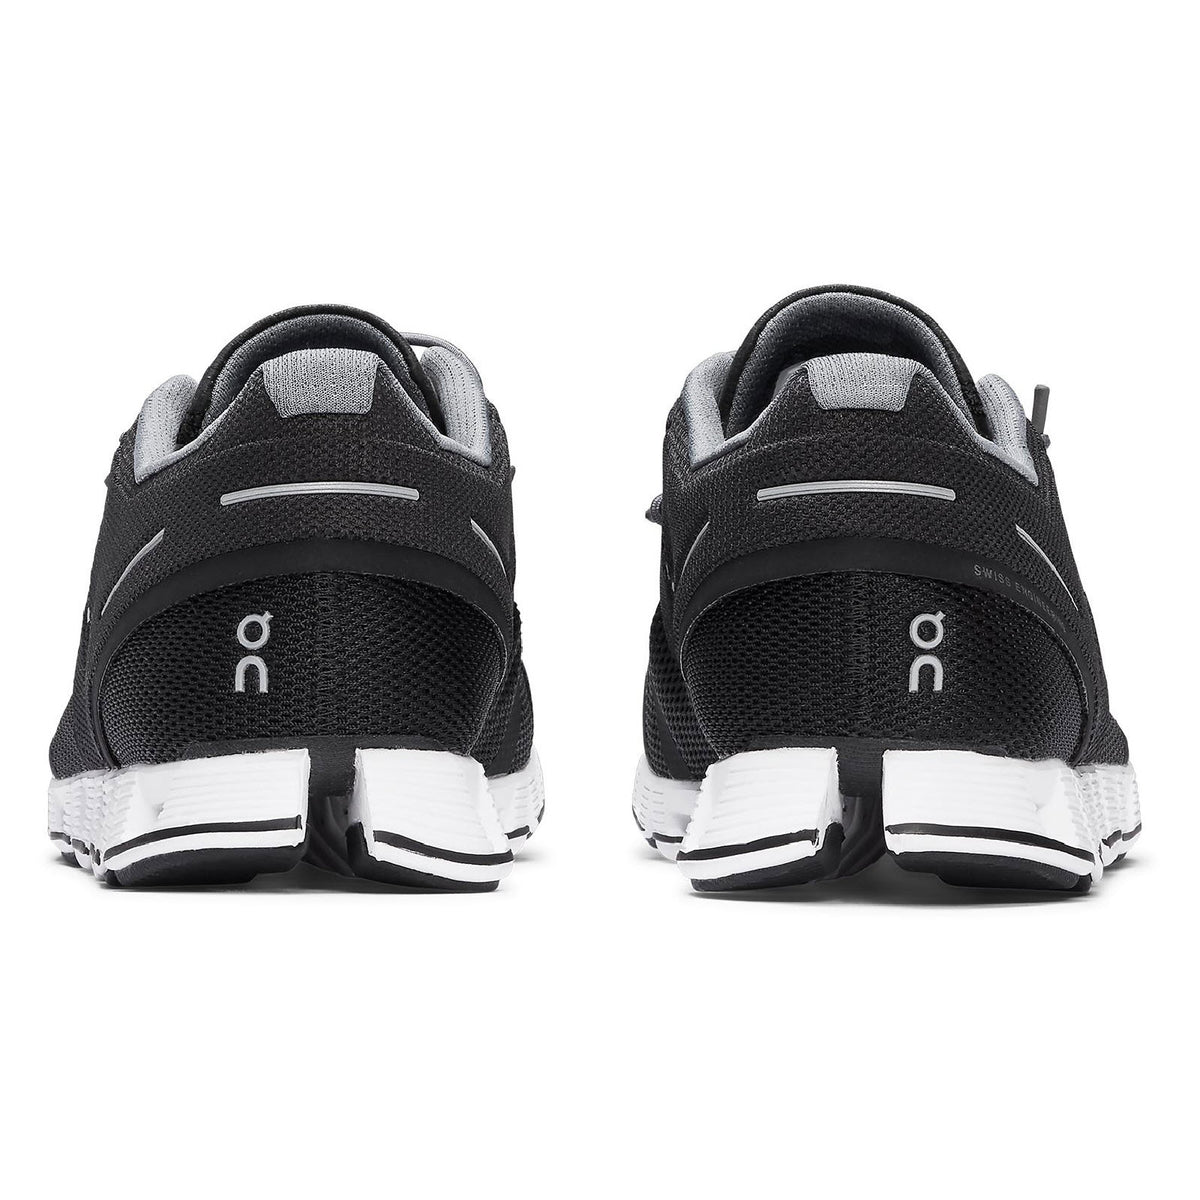 Rear view of a pair of black and white On Running Cloud running shoes with a breathable mesh upper.